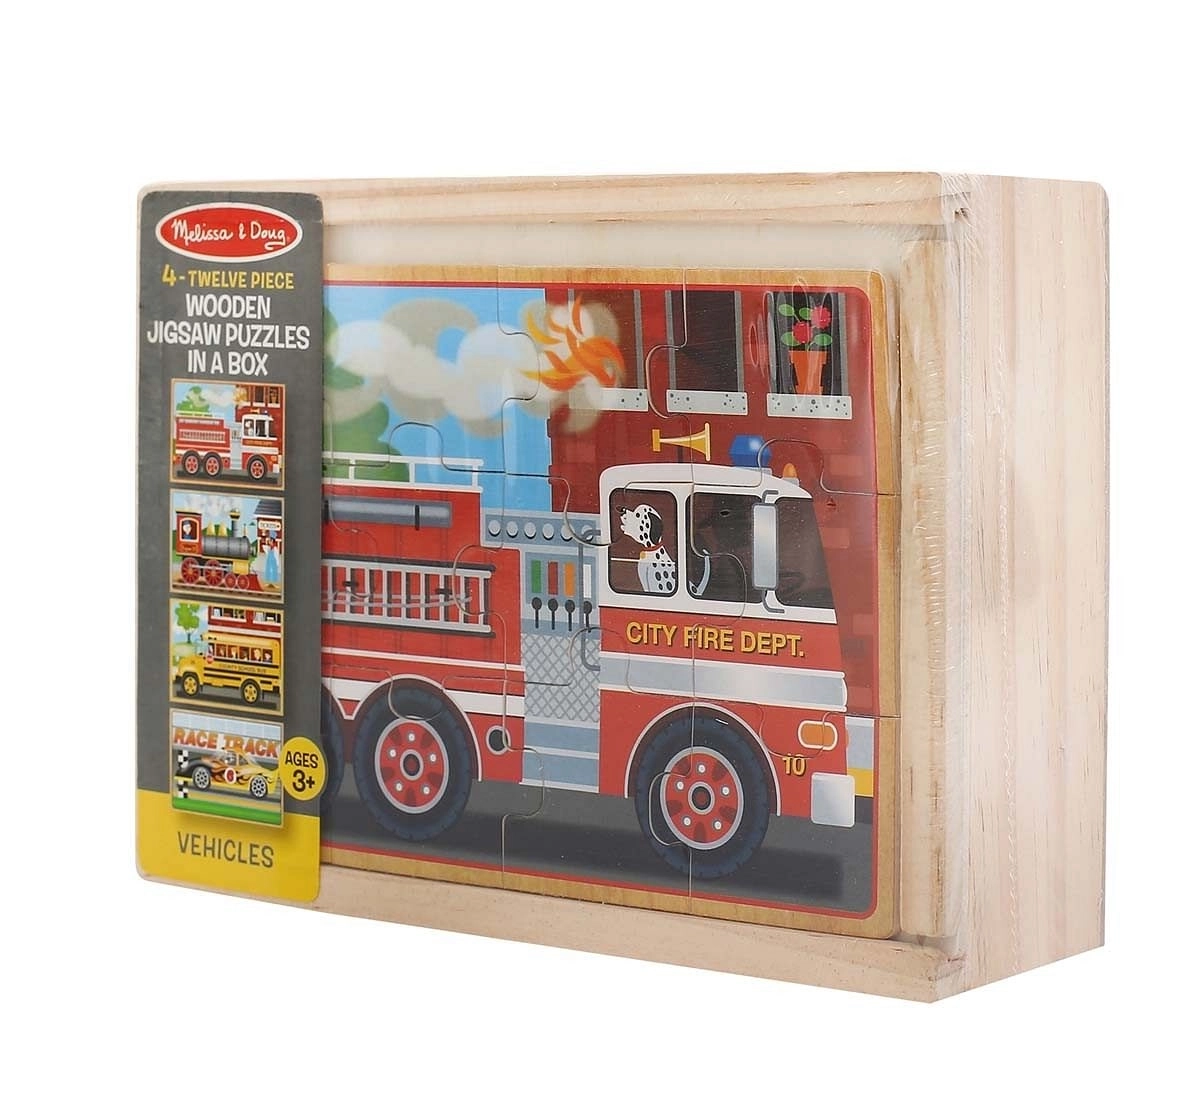 Melissa & Doug Vehicles Jigsaw Puzzles In A Box (Four Wooden Puzzles, Sturdy Wooden Storage Box, 12-Piece Puzzles) Wooden Toys for Kids age 3Y+ 